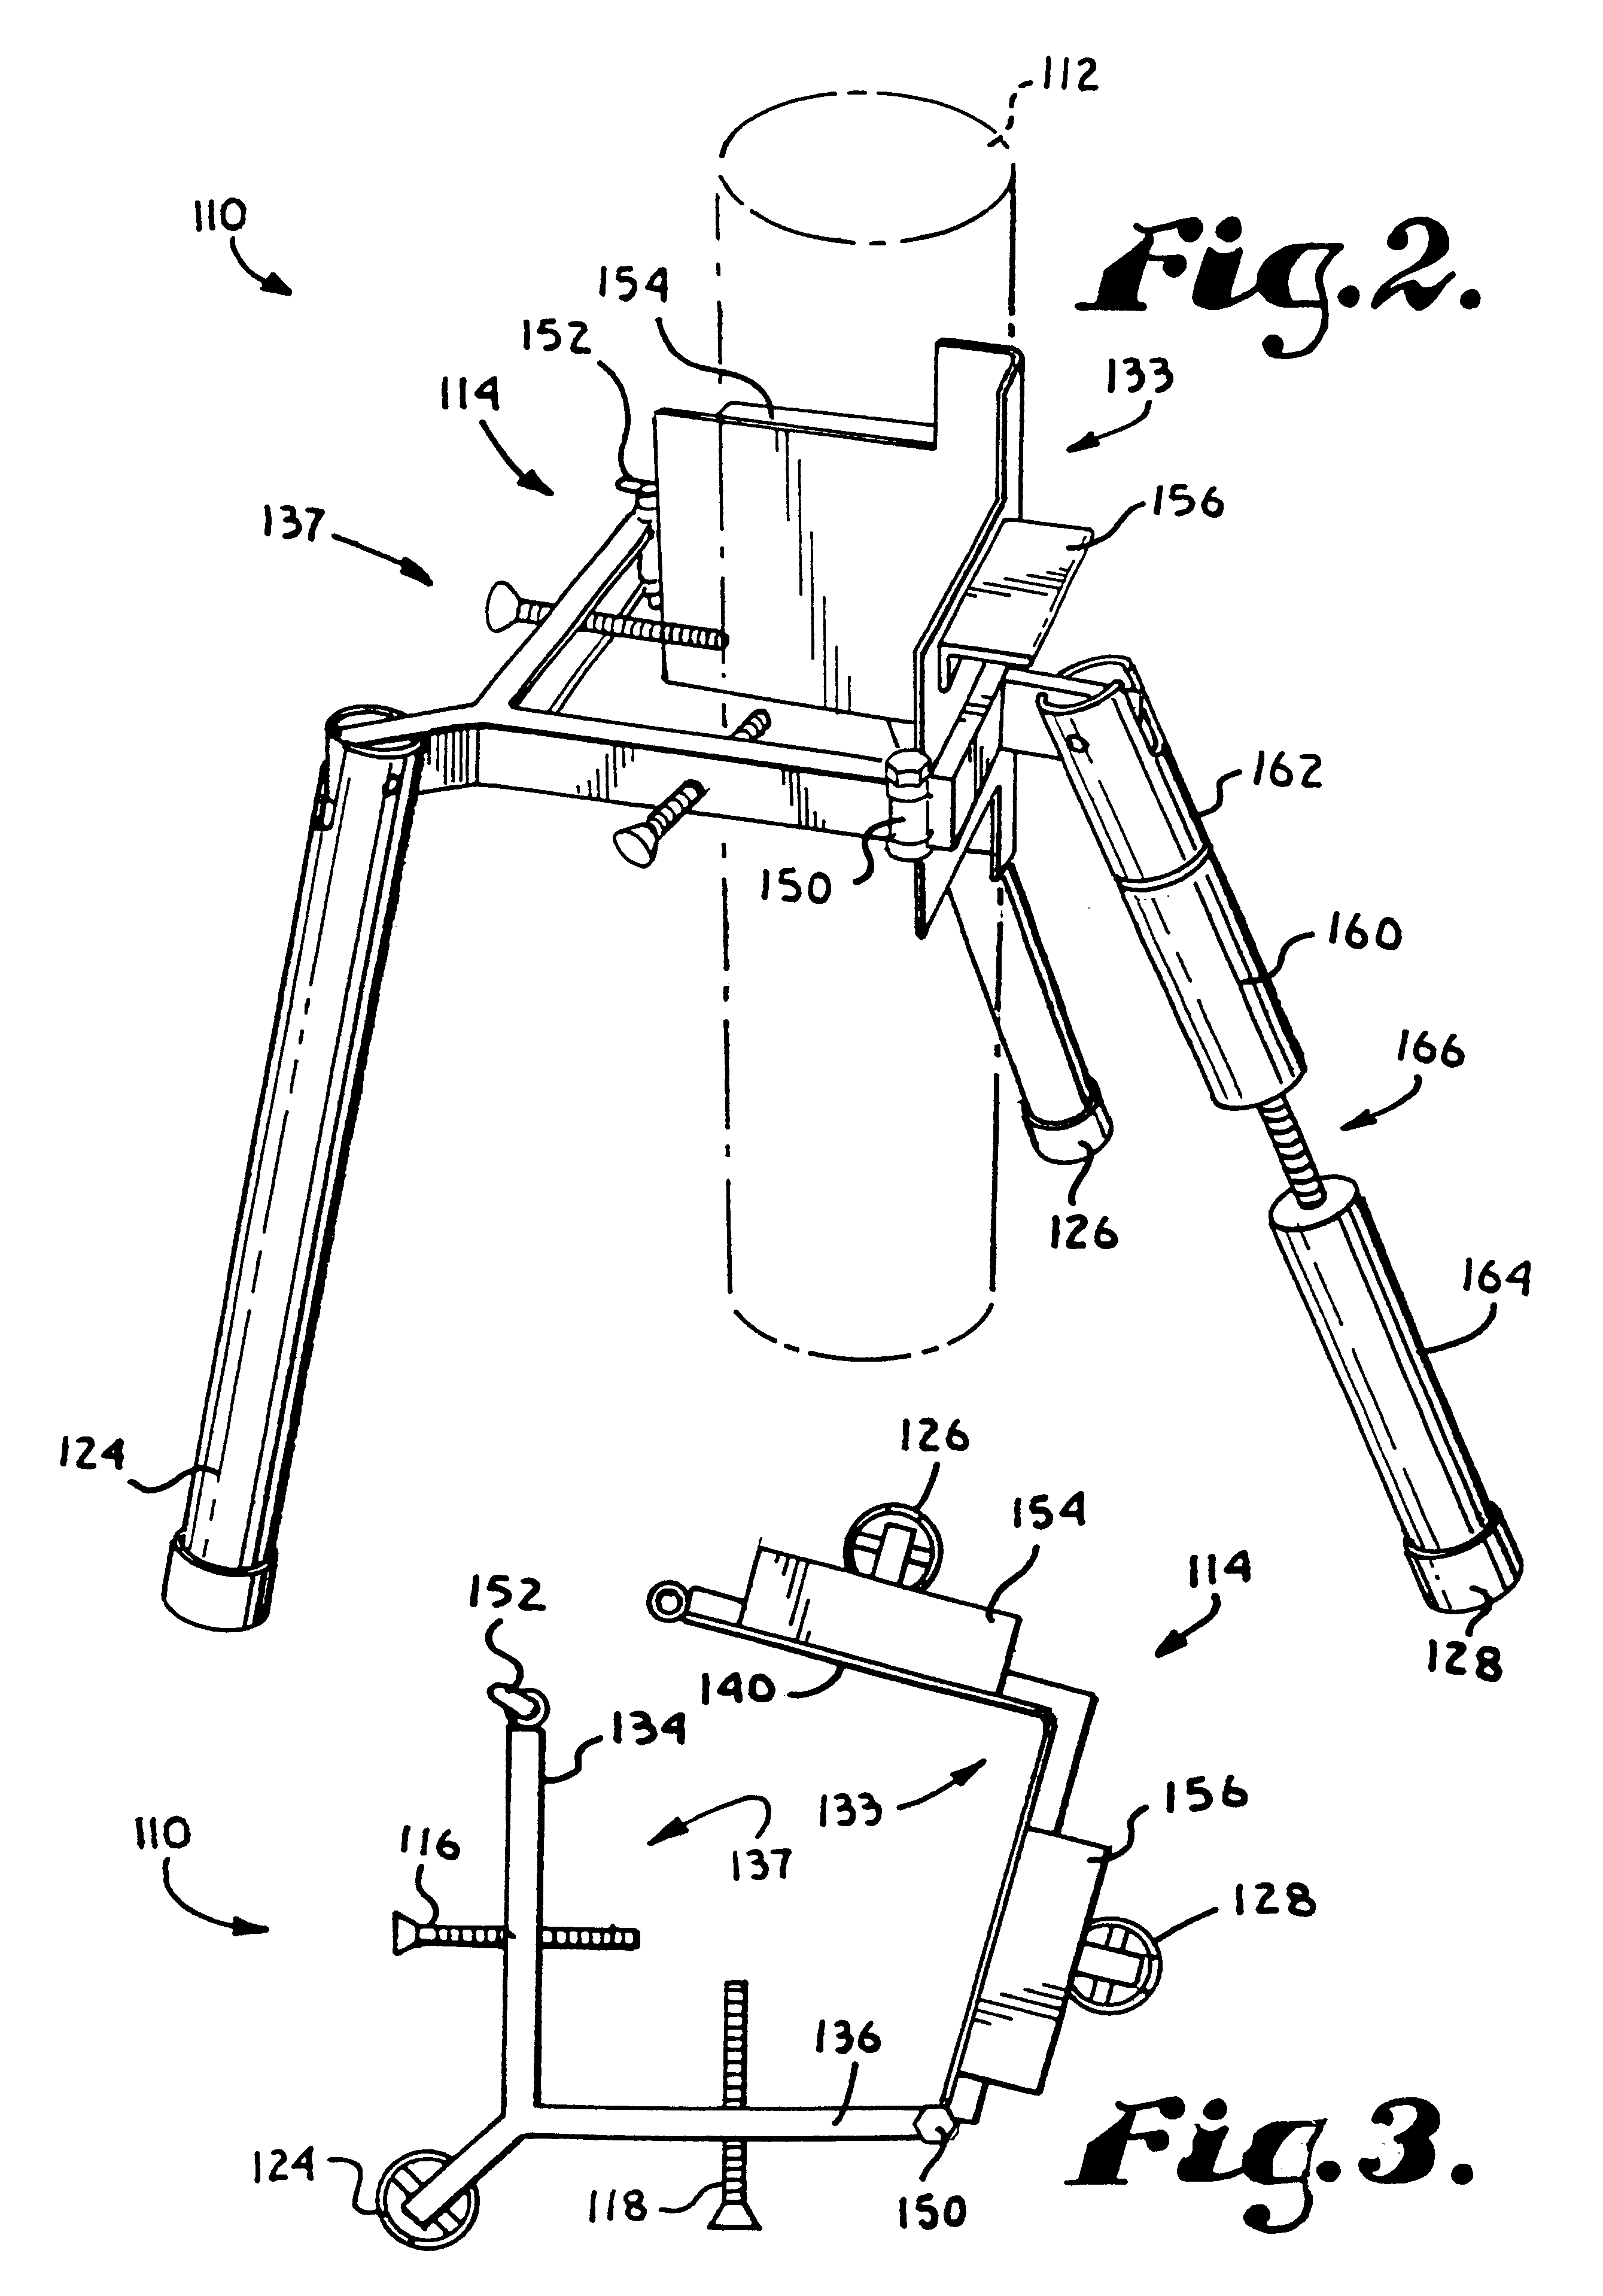 Self-supporting post leveling device